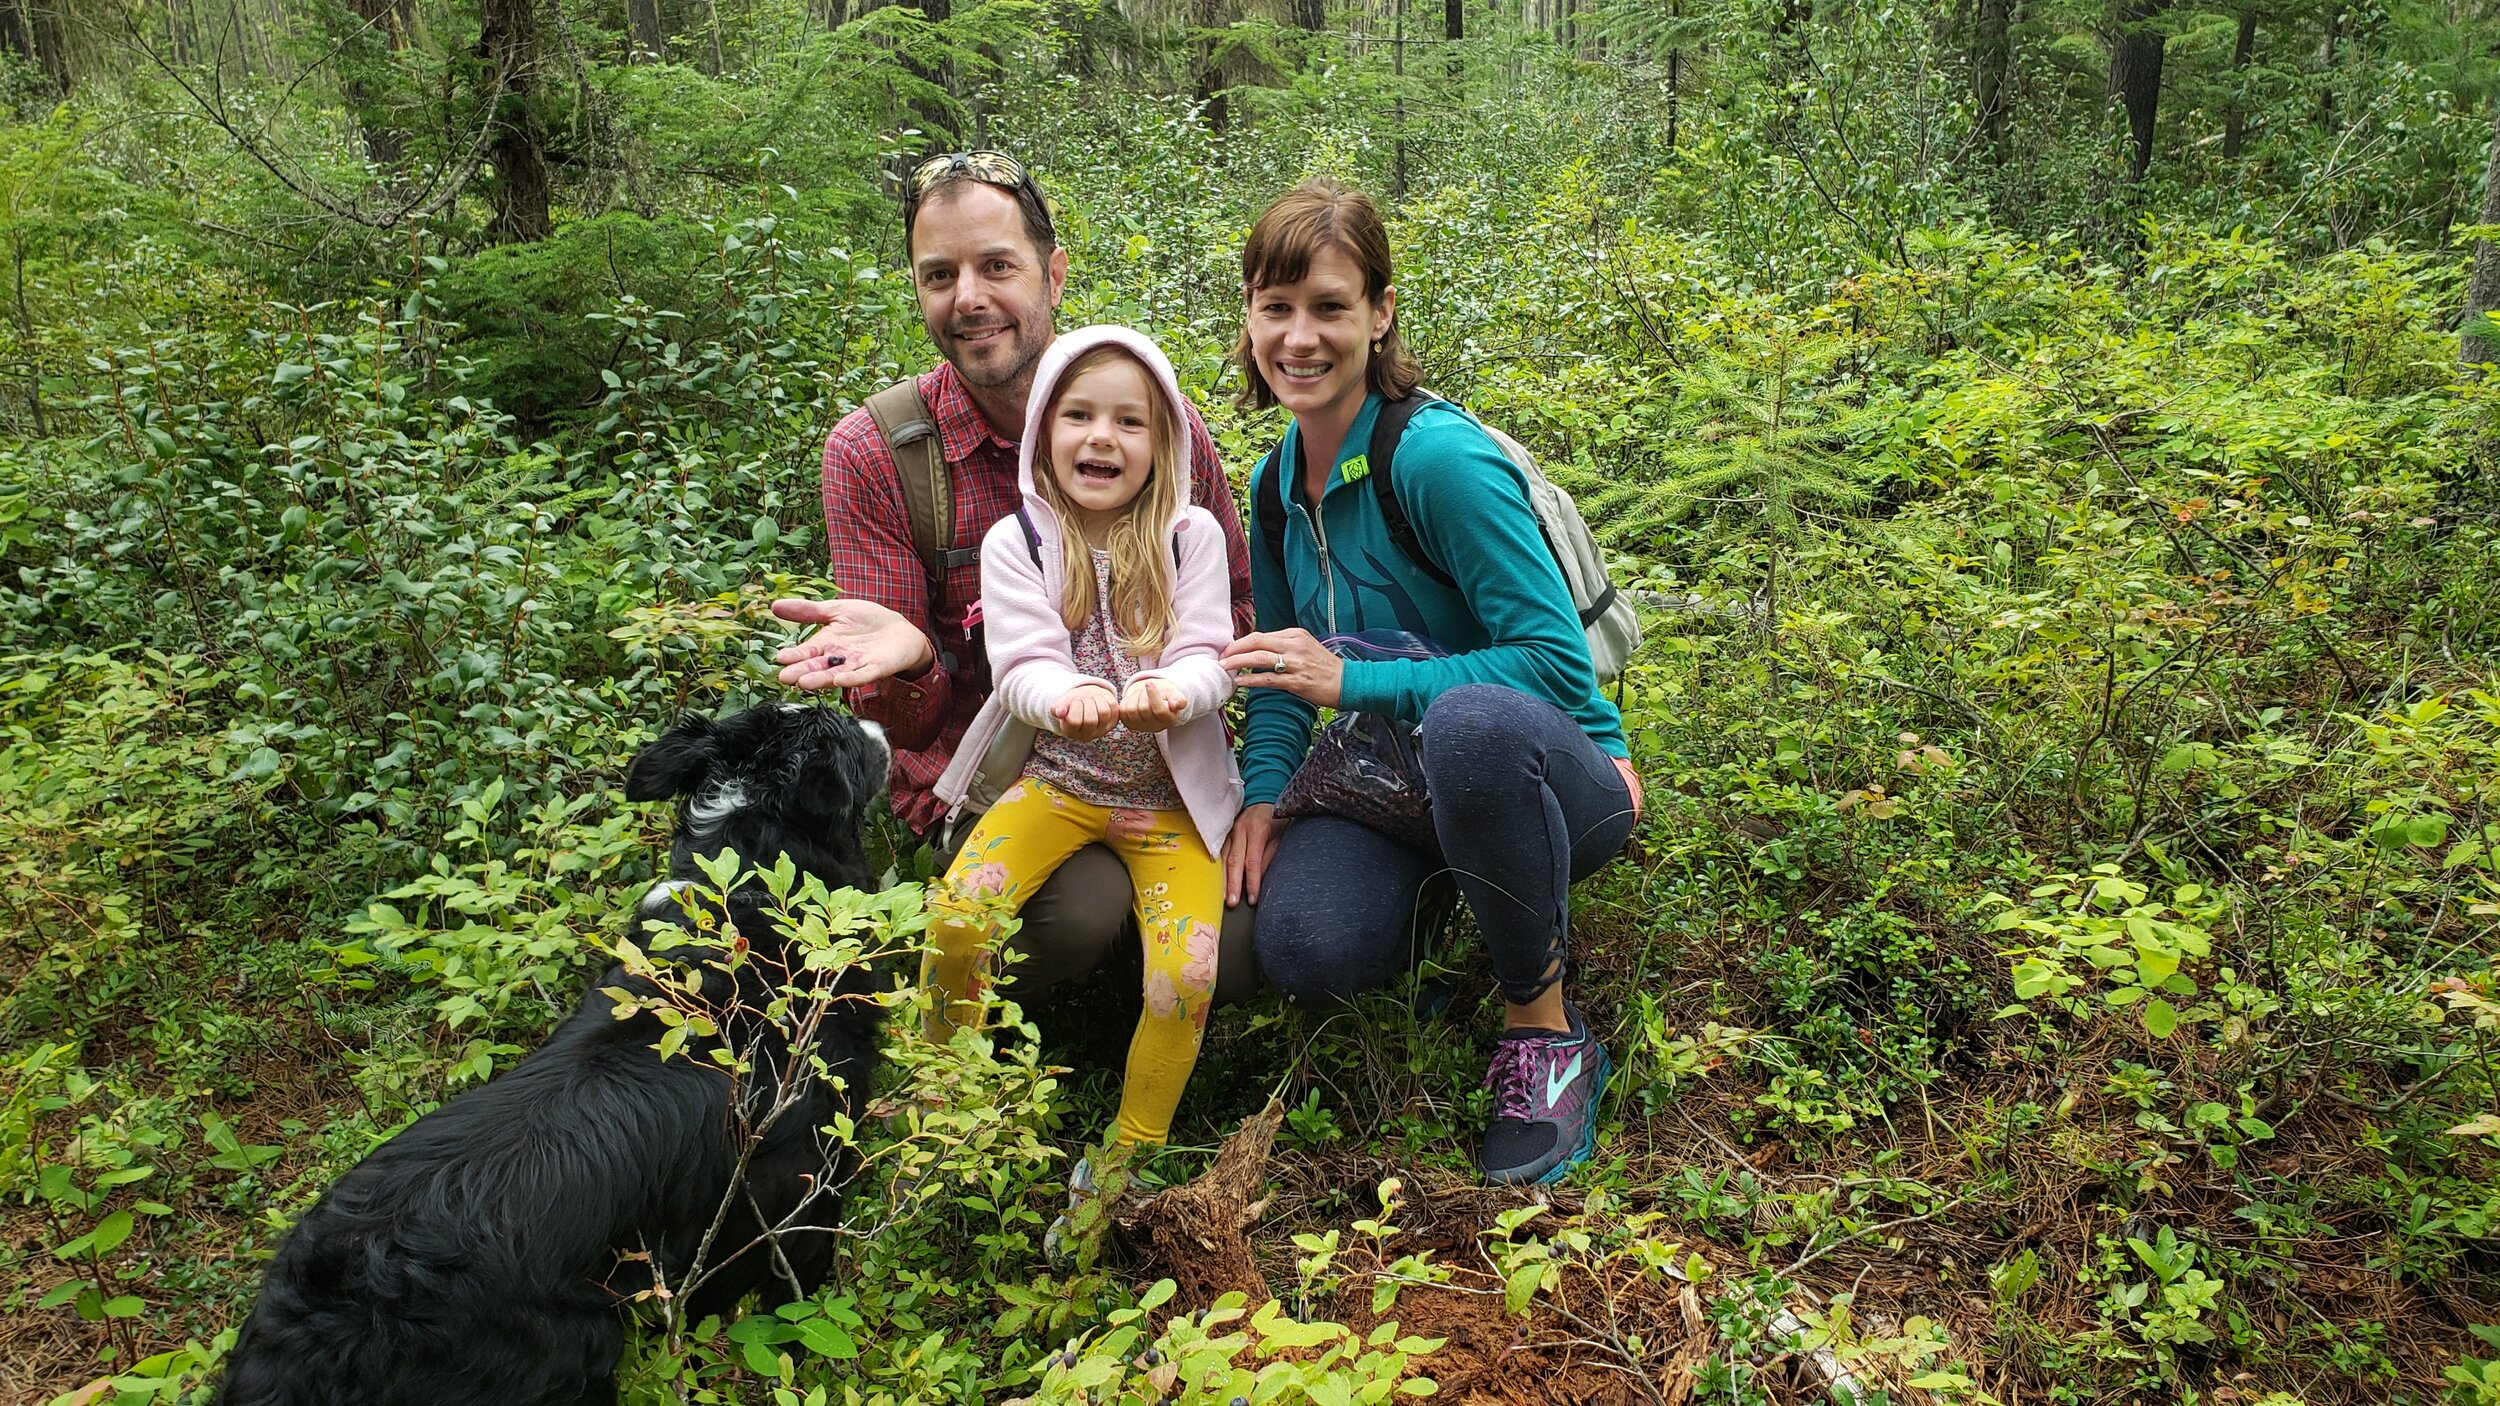 Picking huckleberries with my family